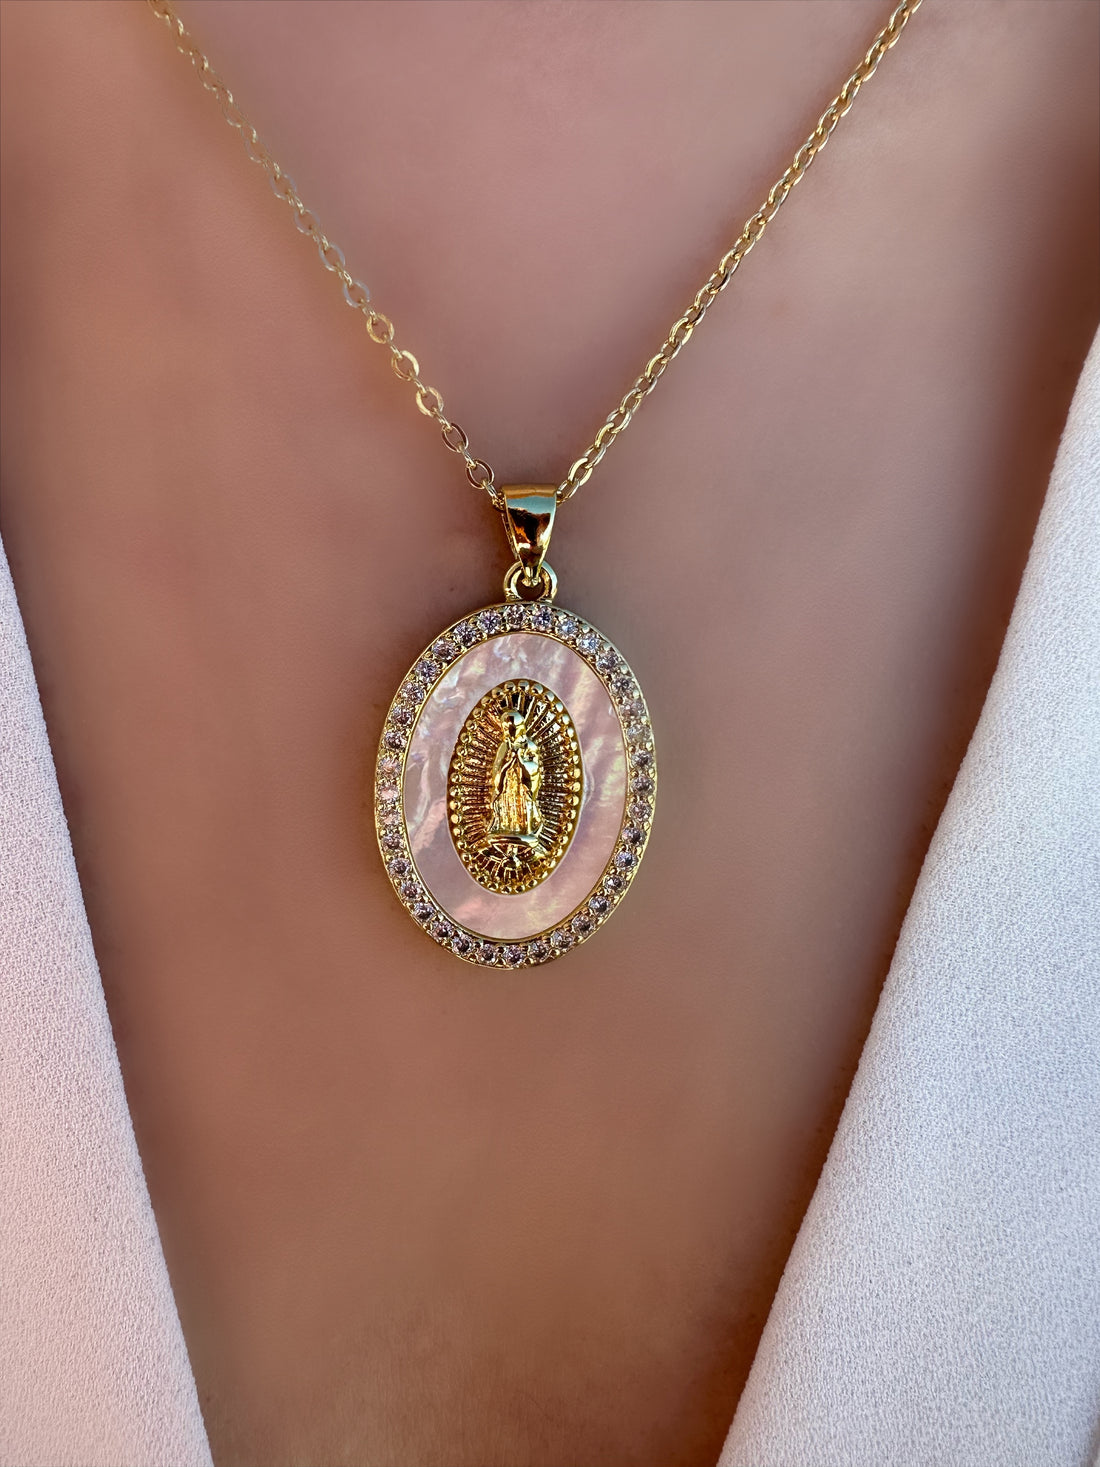 virgin mary necklace, mother mary necklace, gold diamond virgin mary necklace, virgin mary pendant, catholic gifts, christian gifts, bridal gift, protection necklace, our lady of guadalupe necklace, dainty mary necklace, christian jewelry, catholic jewelry, catholic necklace, christian necklace